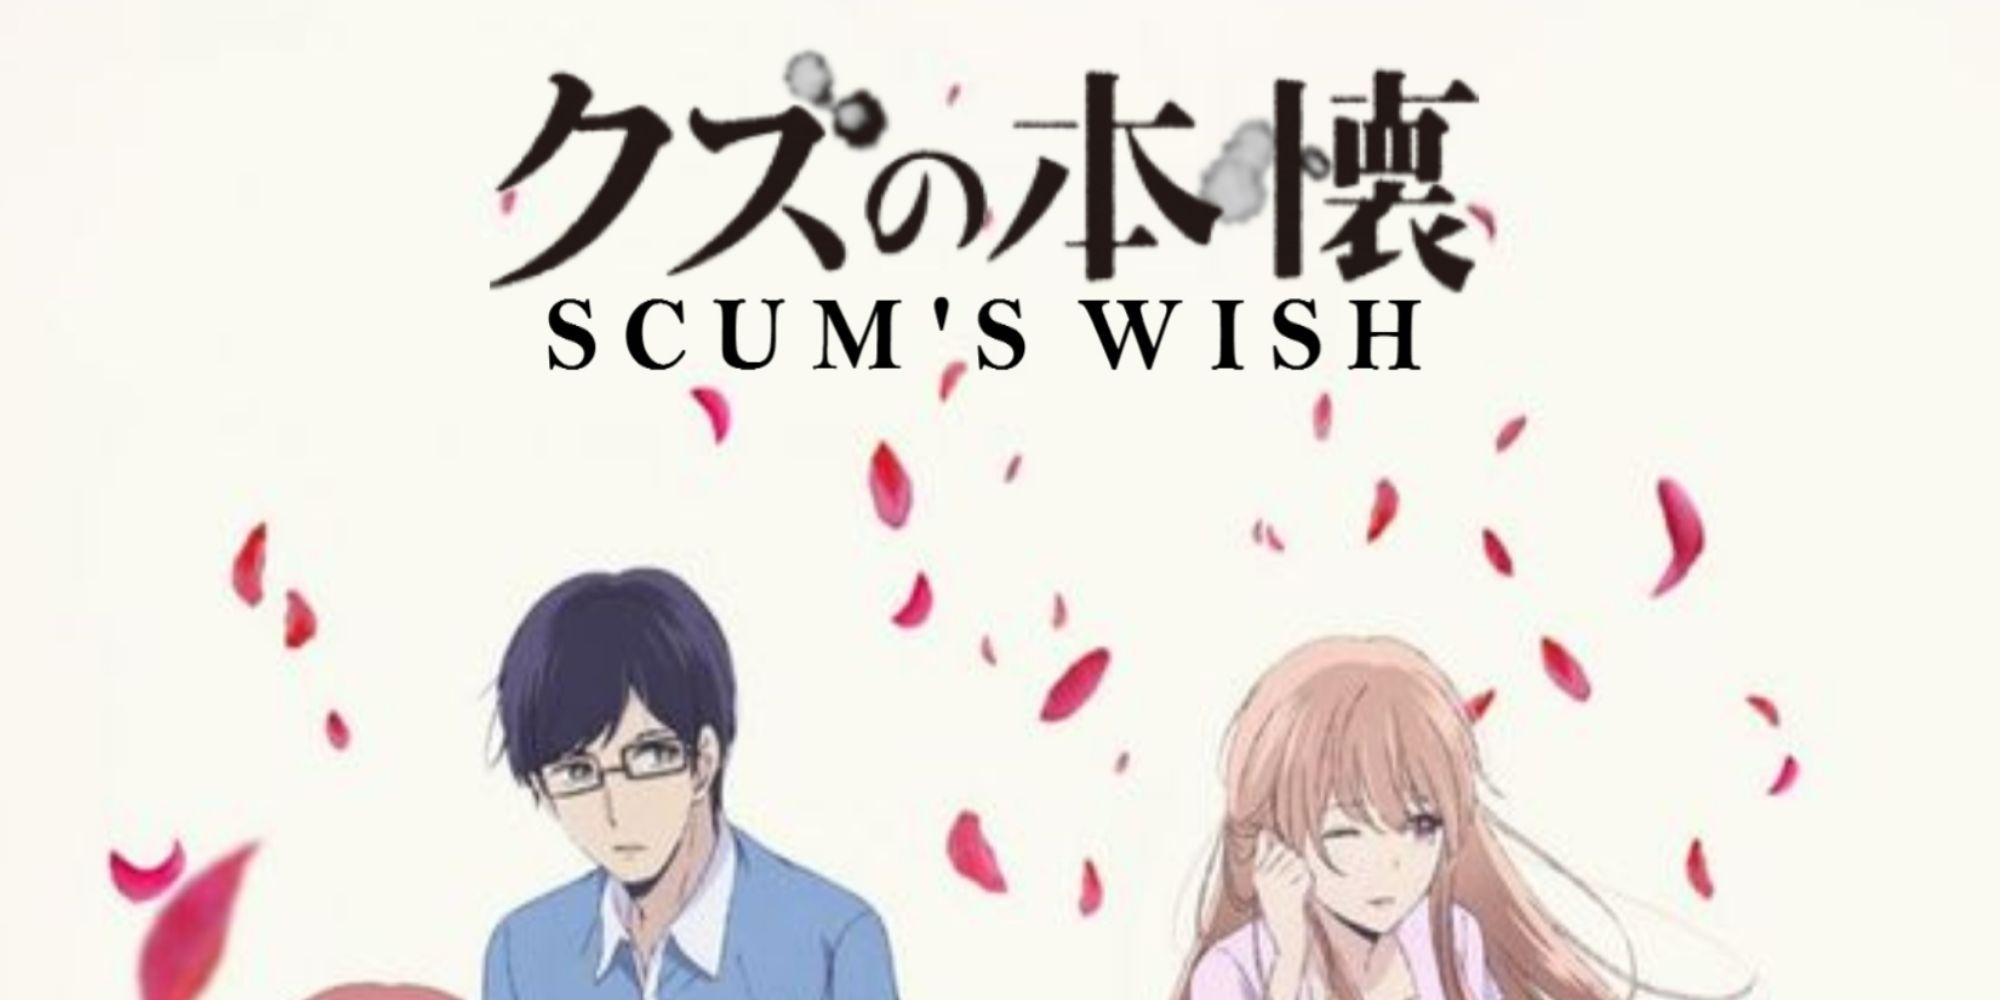 Title and characters from Scum's Wish anime